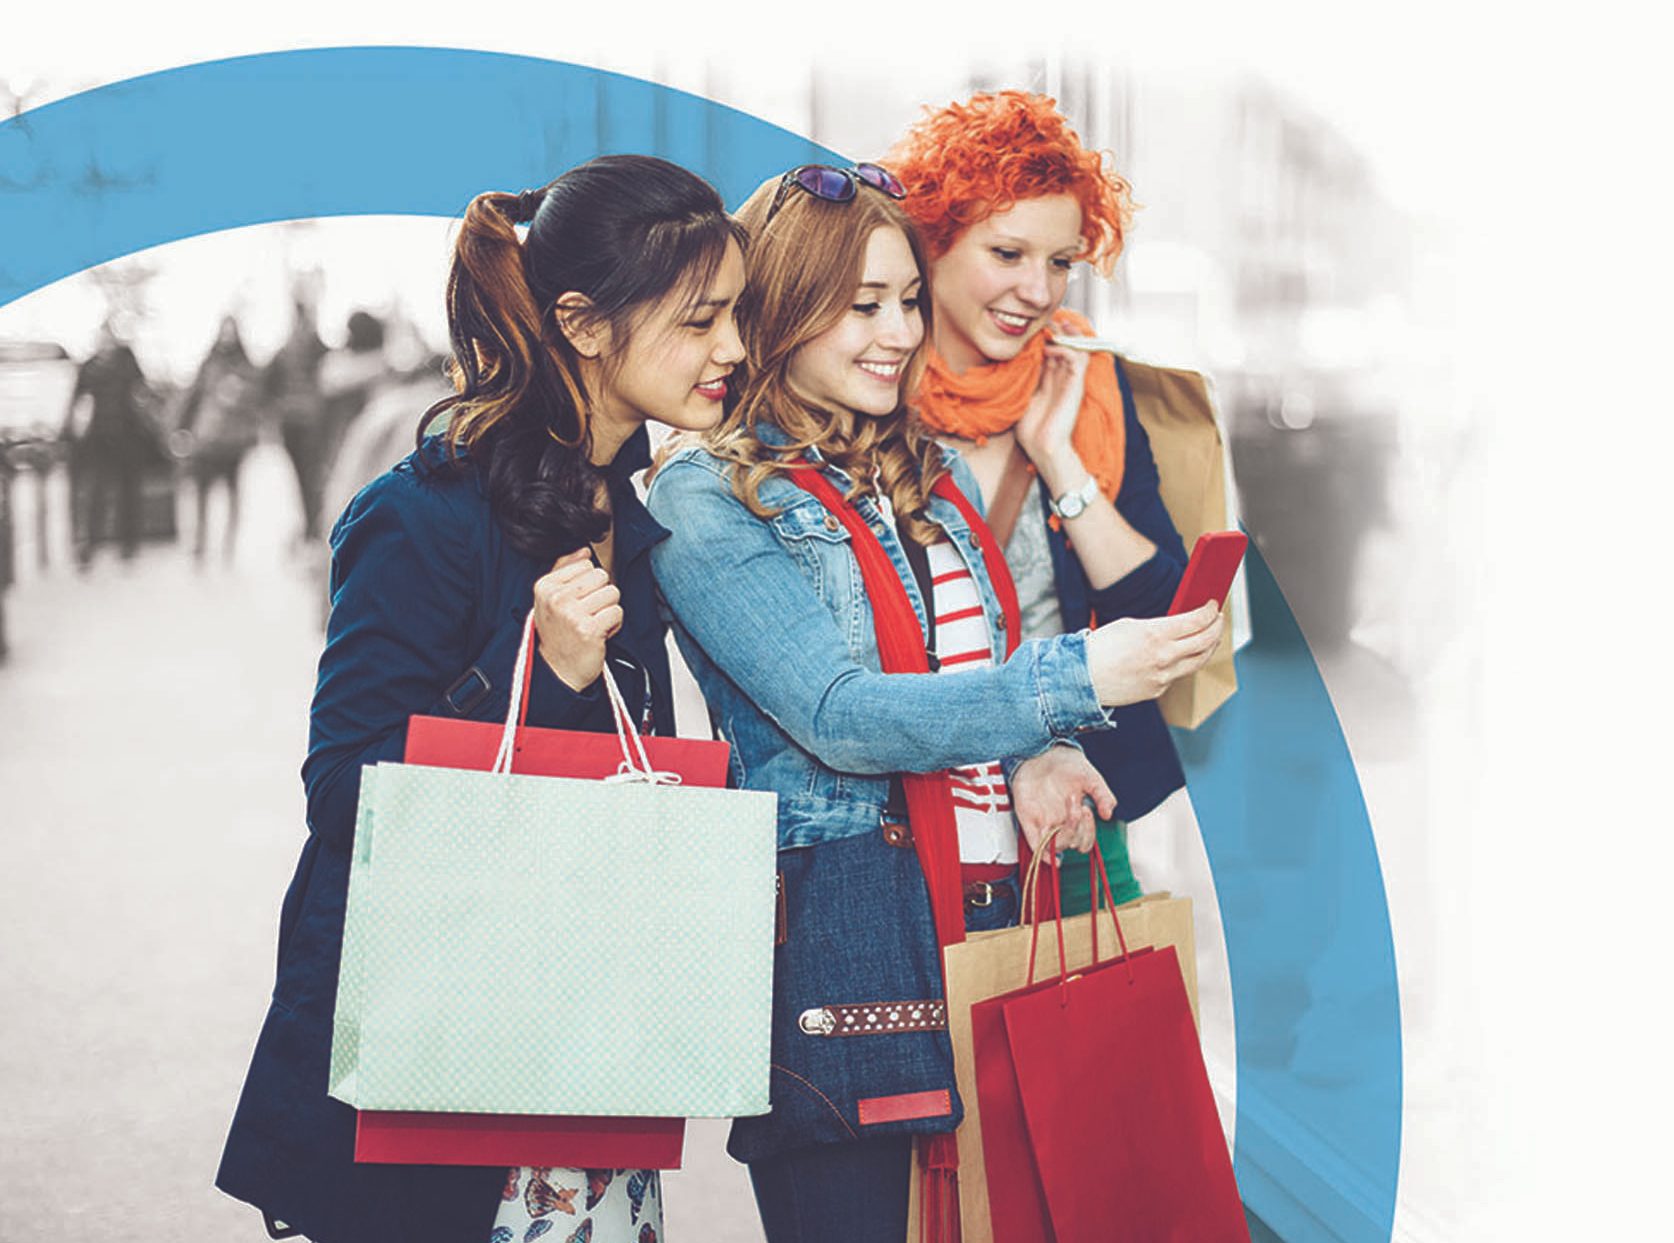 Multi-ethnic group is texting next to a shopping mall. The fashionable three women are holding shopping bags and laughing while they are using a smart phone. Outdoors candid shot.